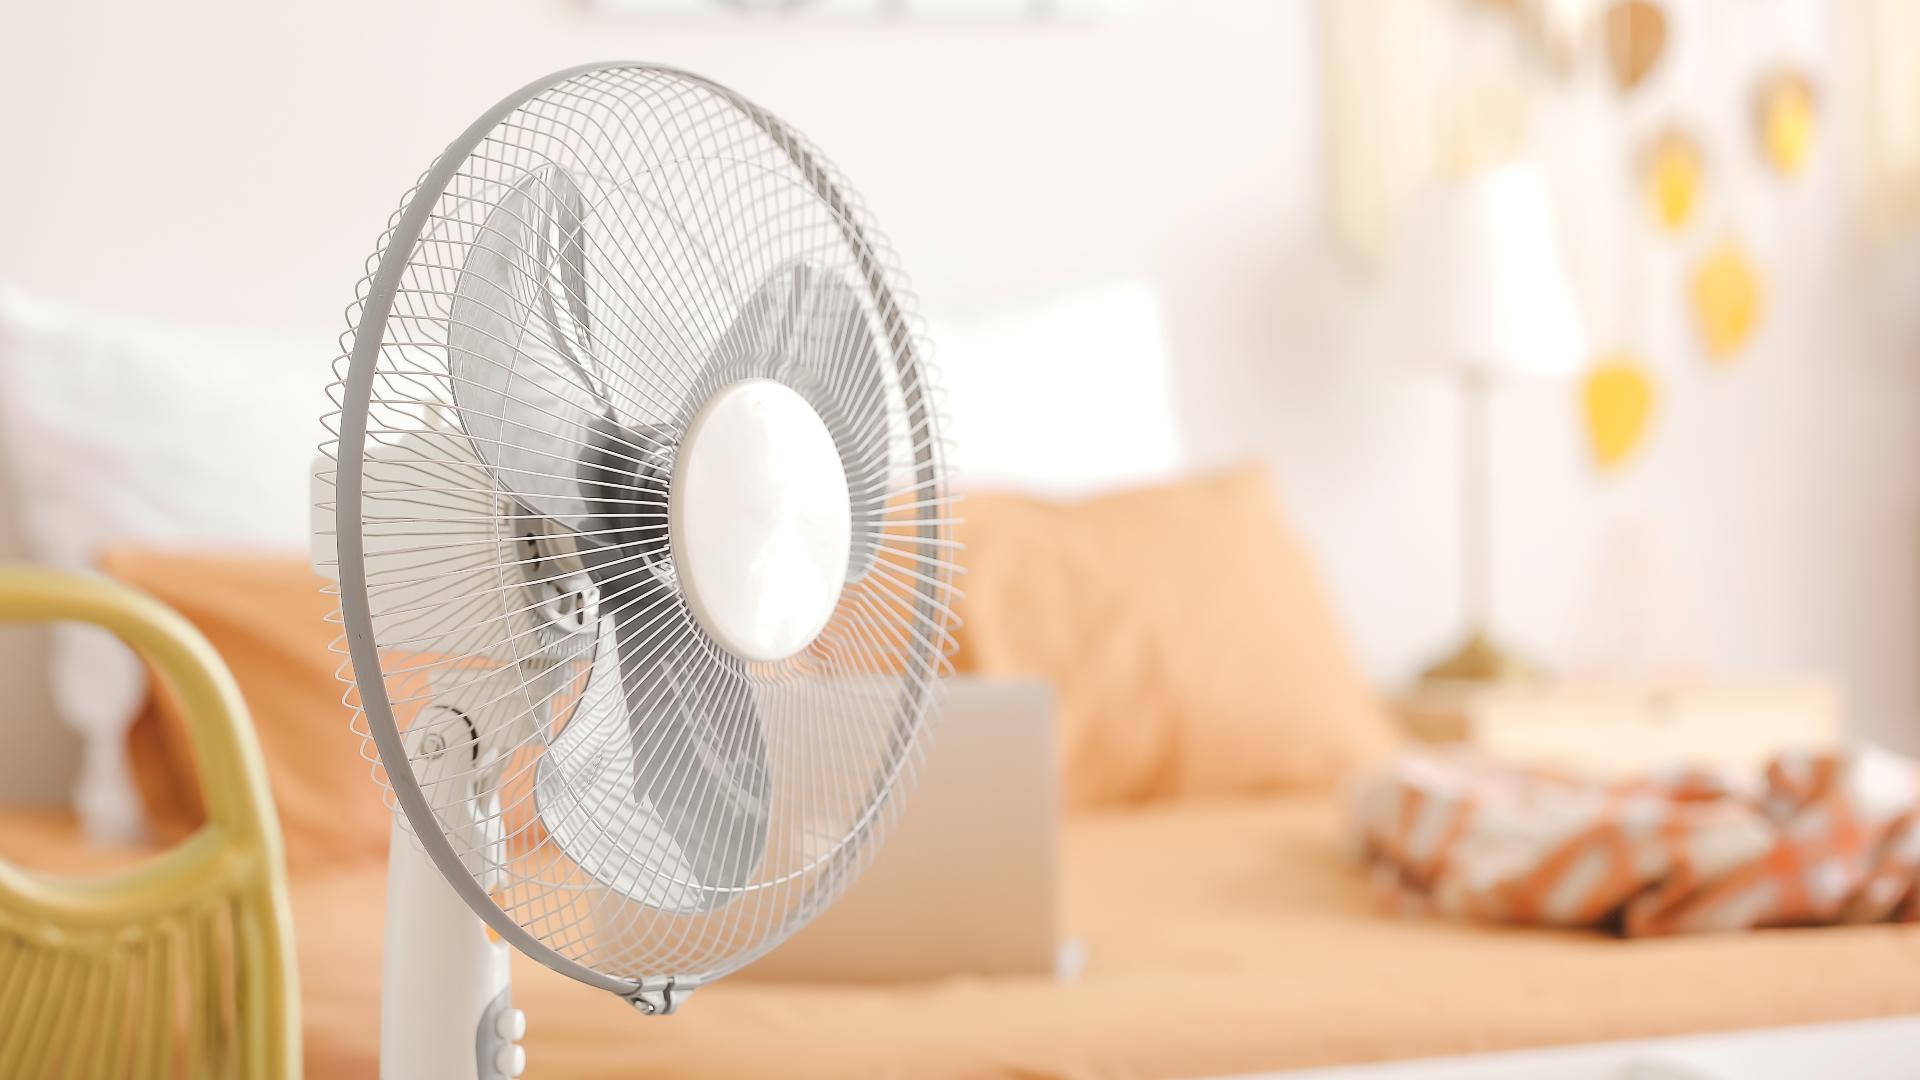 Starting on June 17, eligible residents can receive a free fan to beat this latest heat wave.